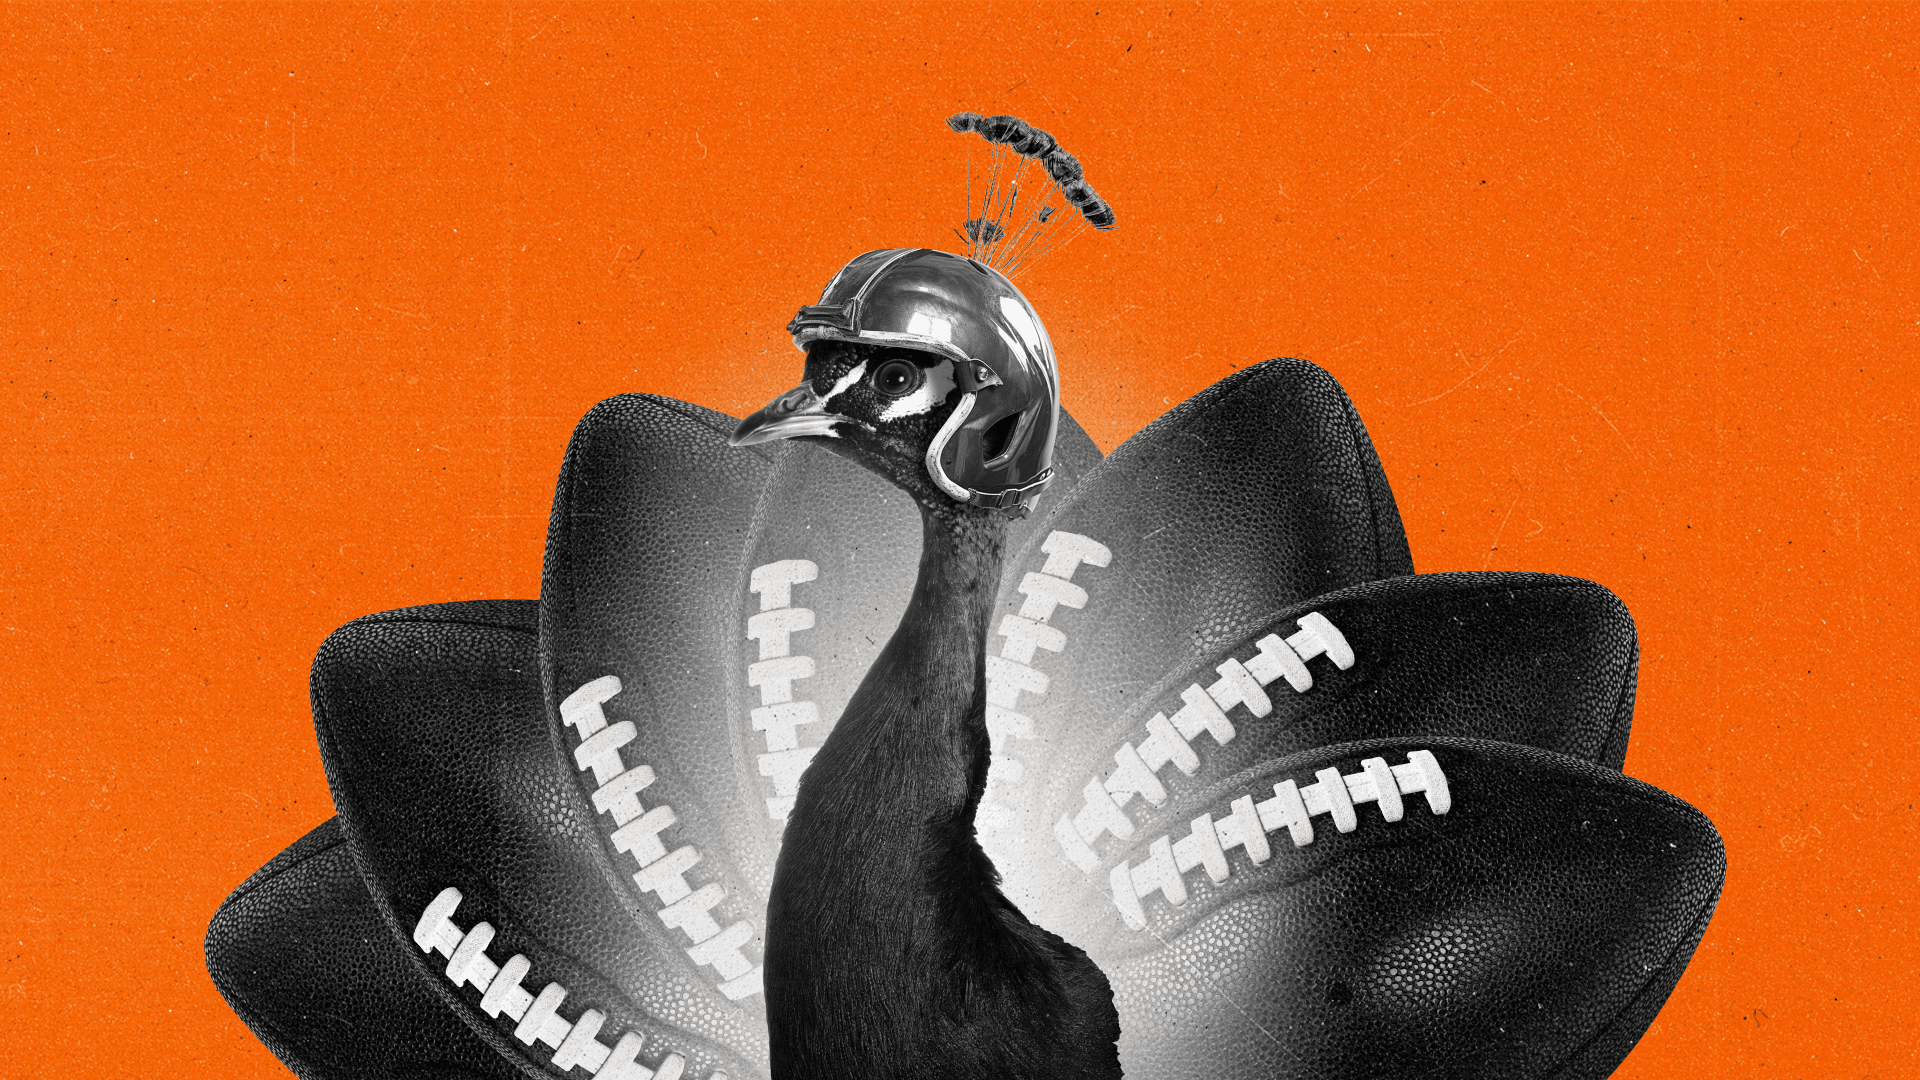 Turkey with footballs as it's tail feathers wears a football helmet in front of an orange background.